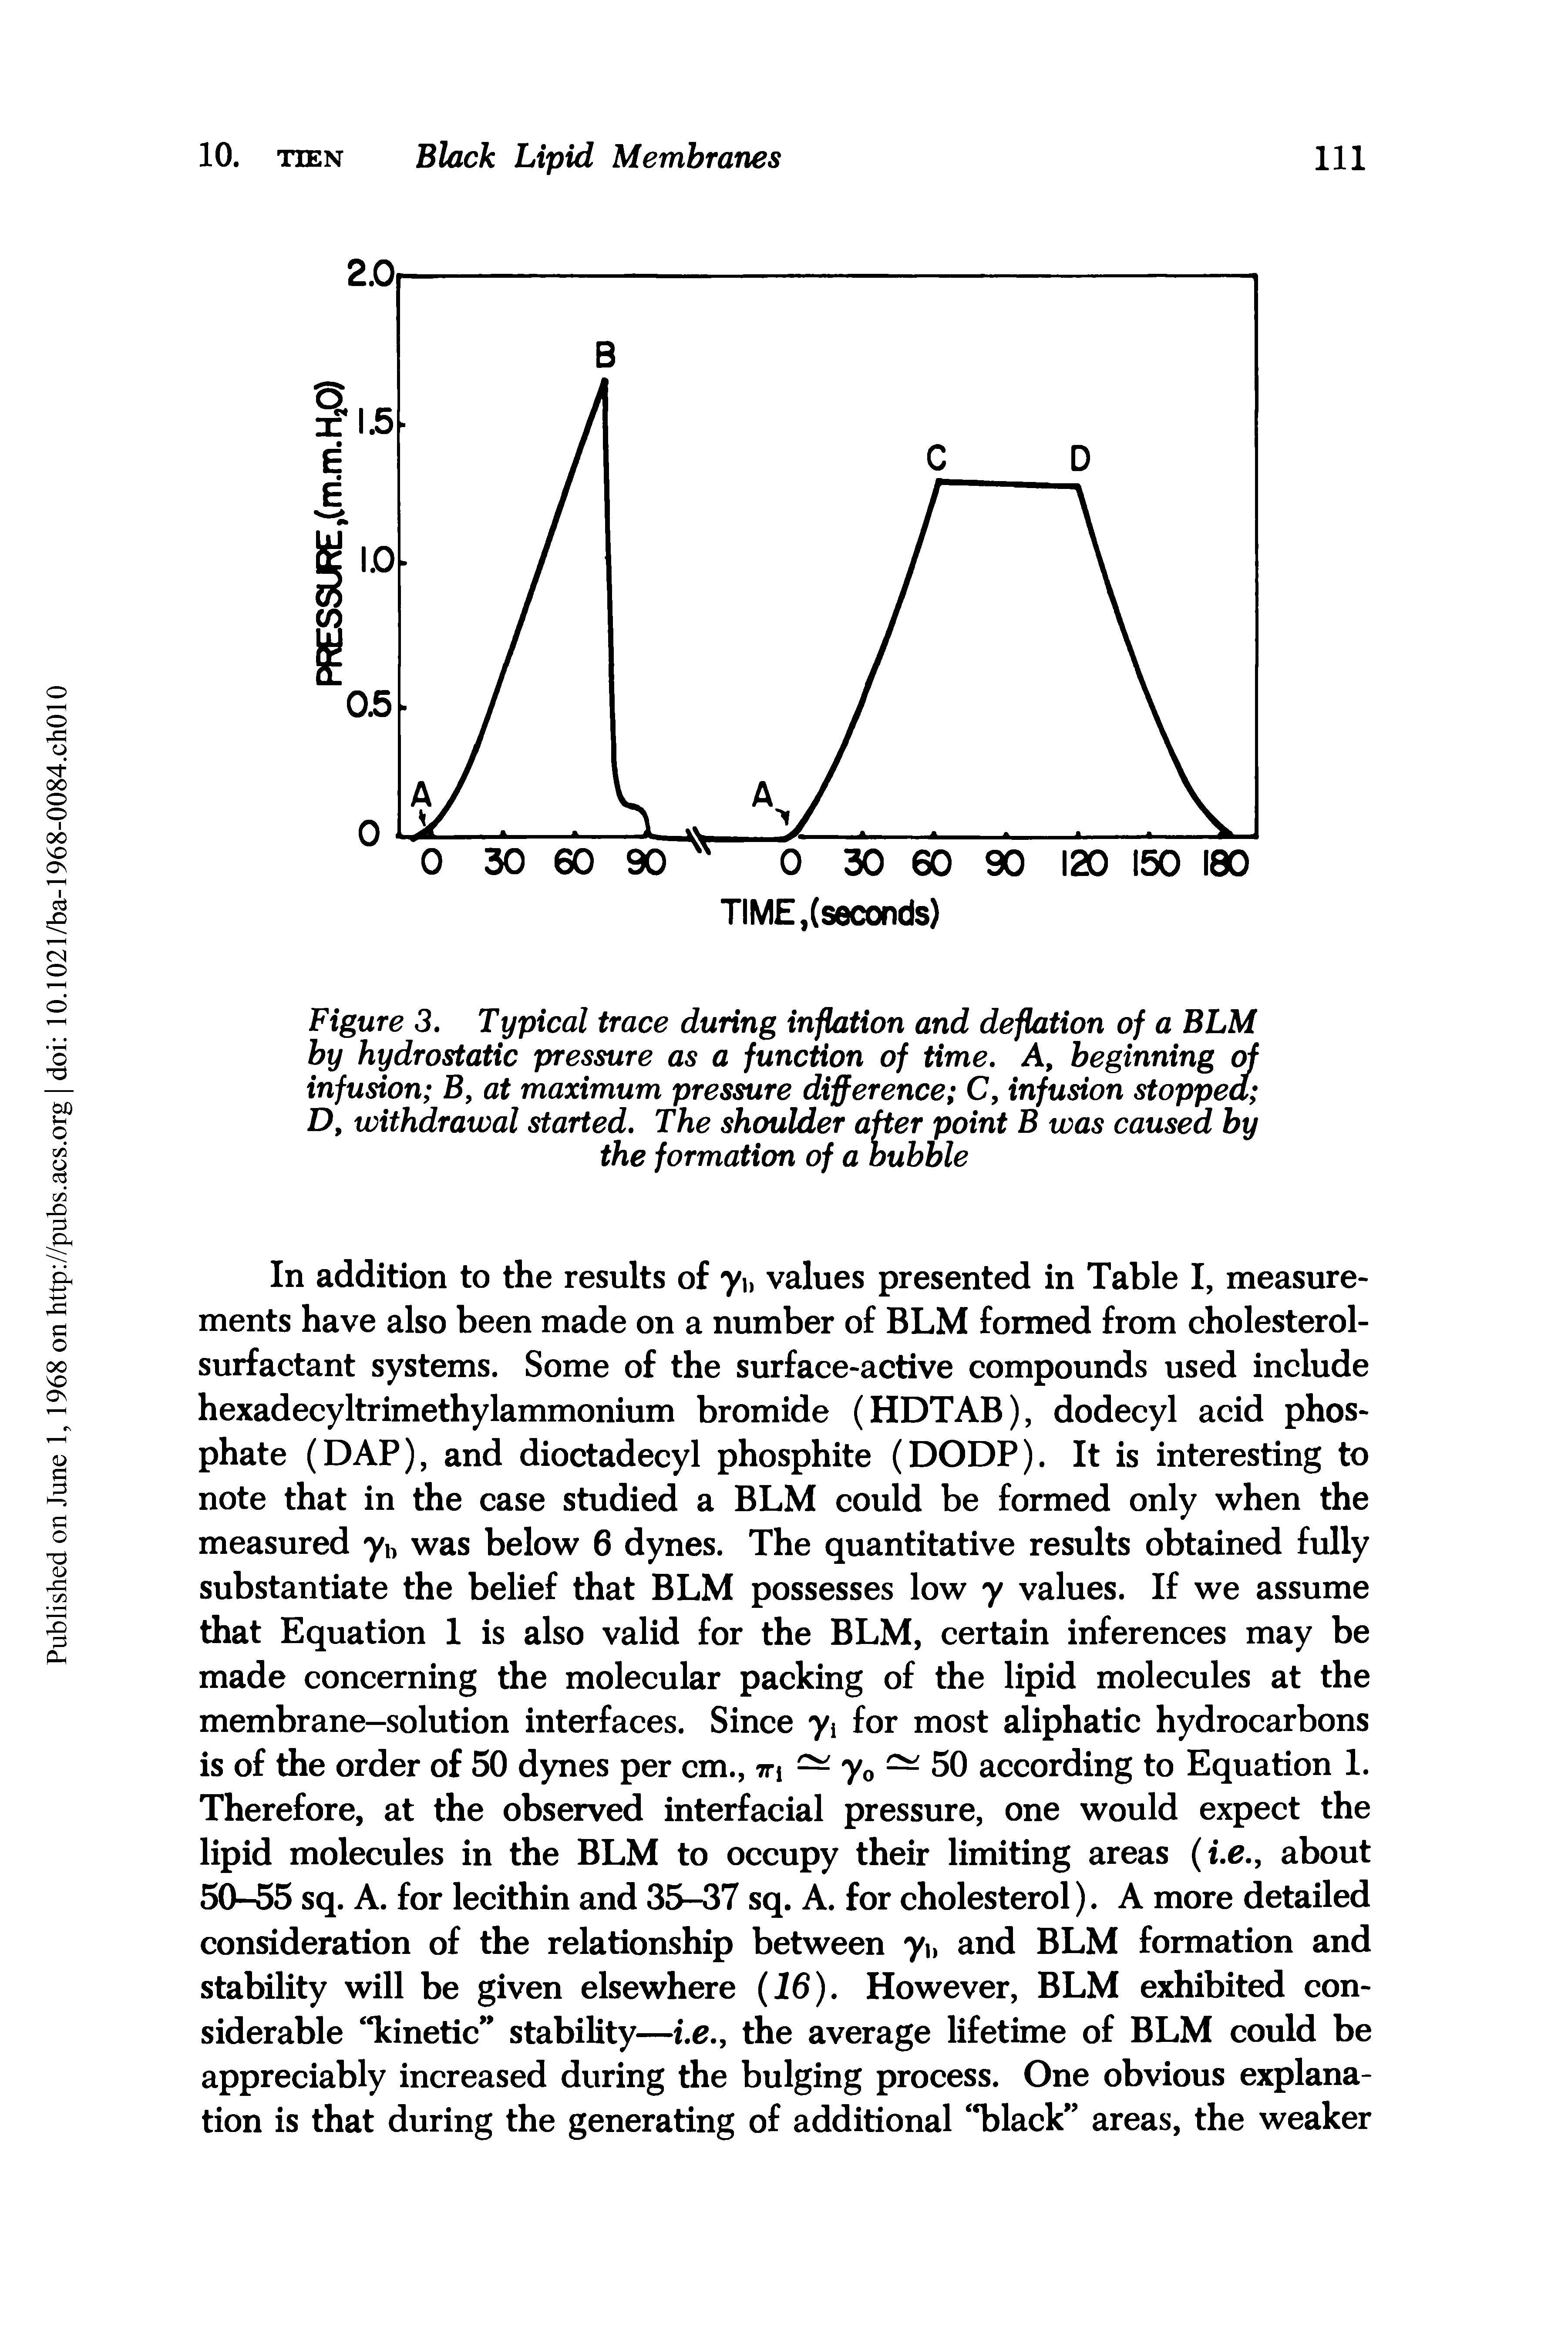 Figure 3. Typical trace during inflation and deflation of a BLM by hydrostatic pressure as a function of time. A, beginning of infusion B, at maximum pressure difference C, infusion stopped D, withdrawal started. The shoulder after point B was caused by the formation of a bubble...